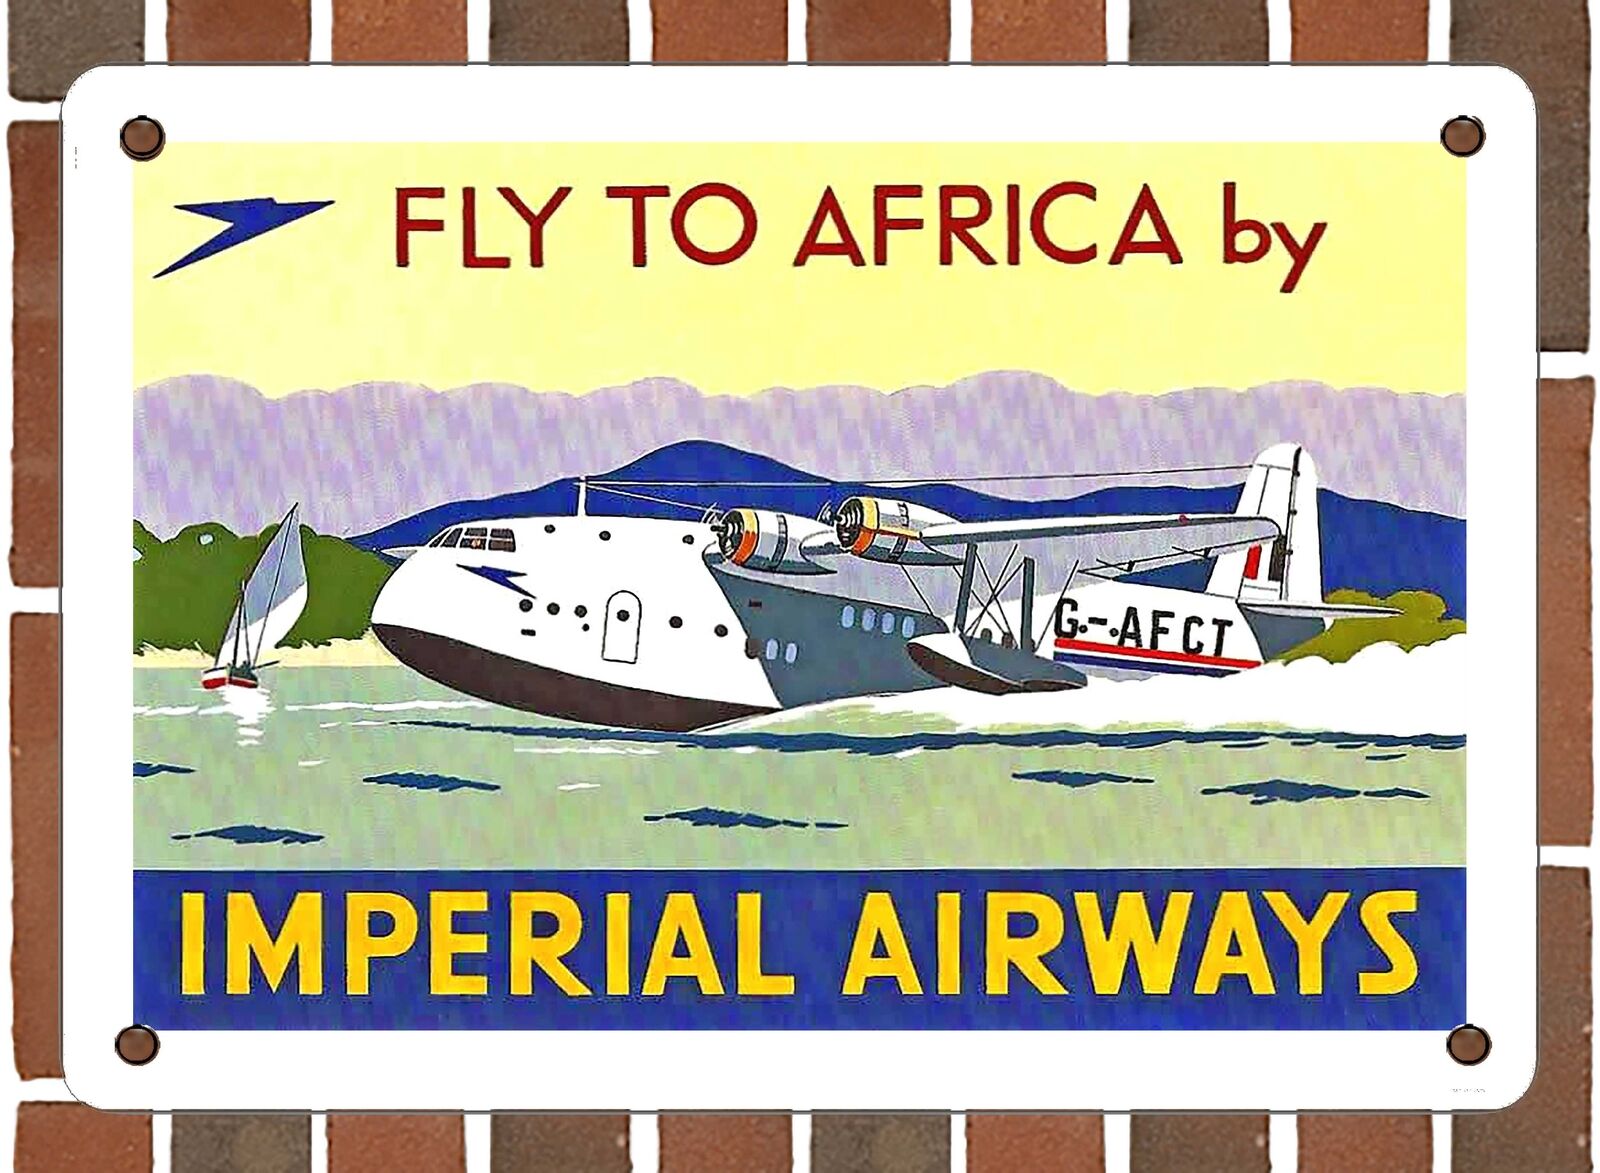 METAL SIGN - 1937 Fly to Africa by Imperial Airways - 10x14 Inches